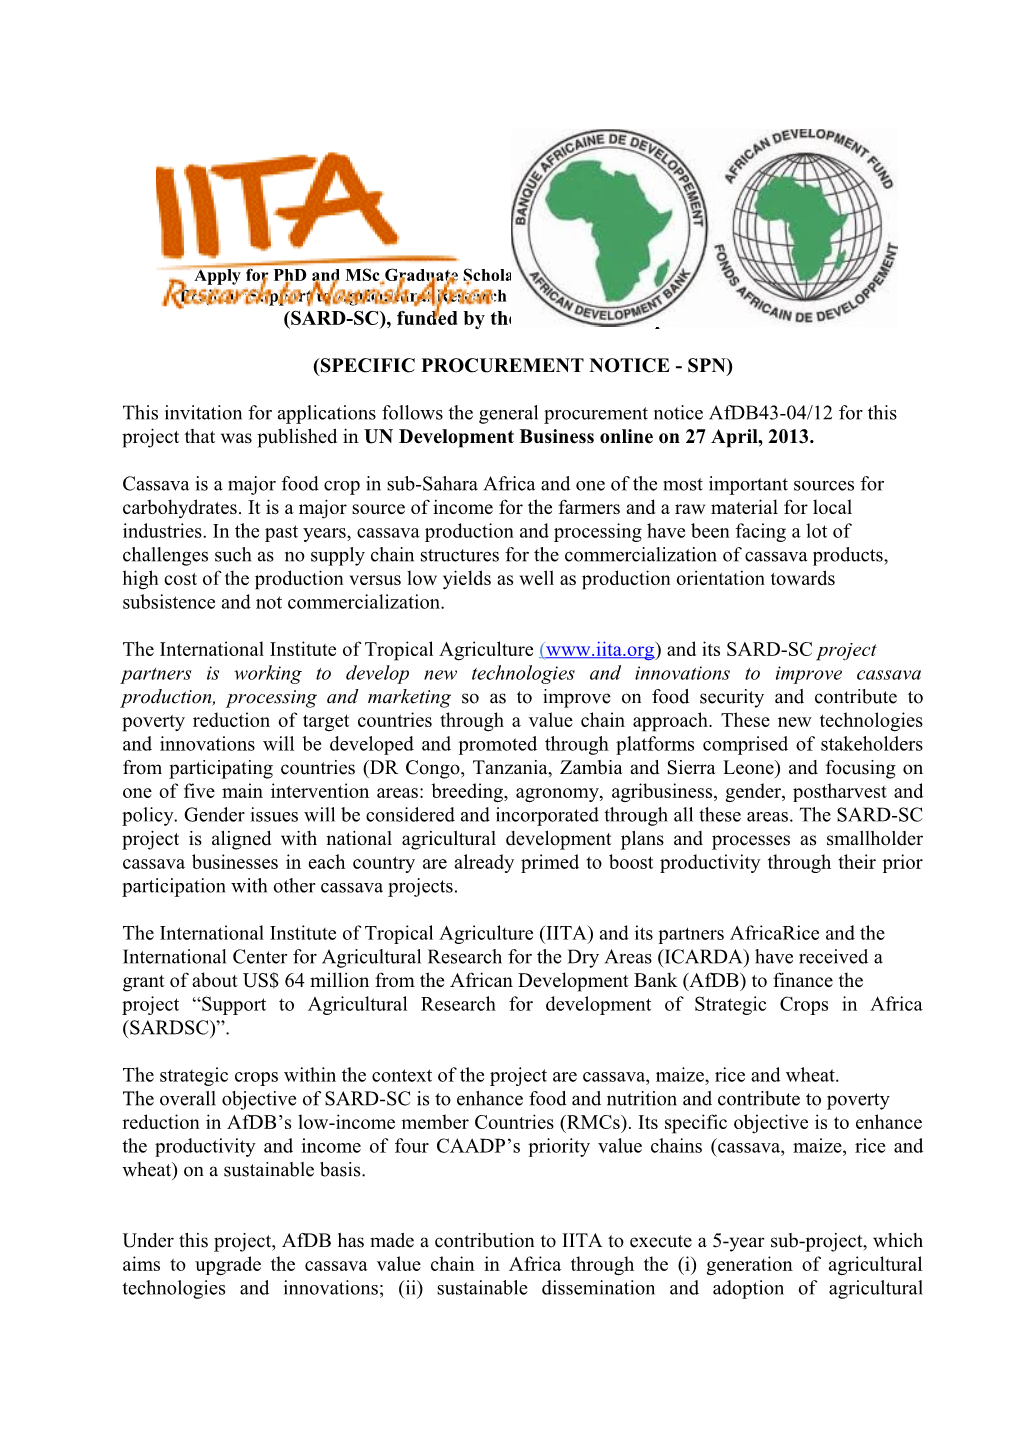 Project Support to Agricultural Research for Development of Strategic Crops in Africa